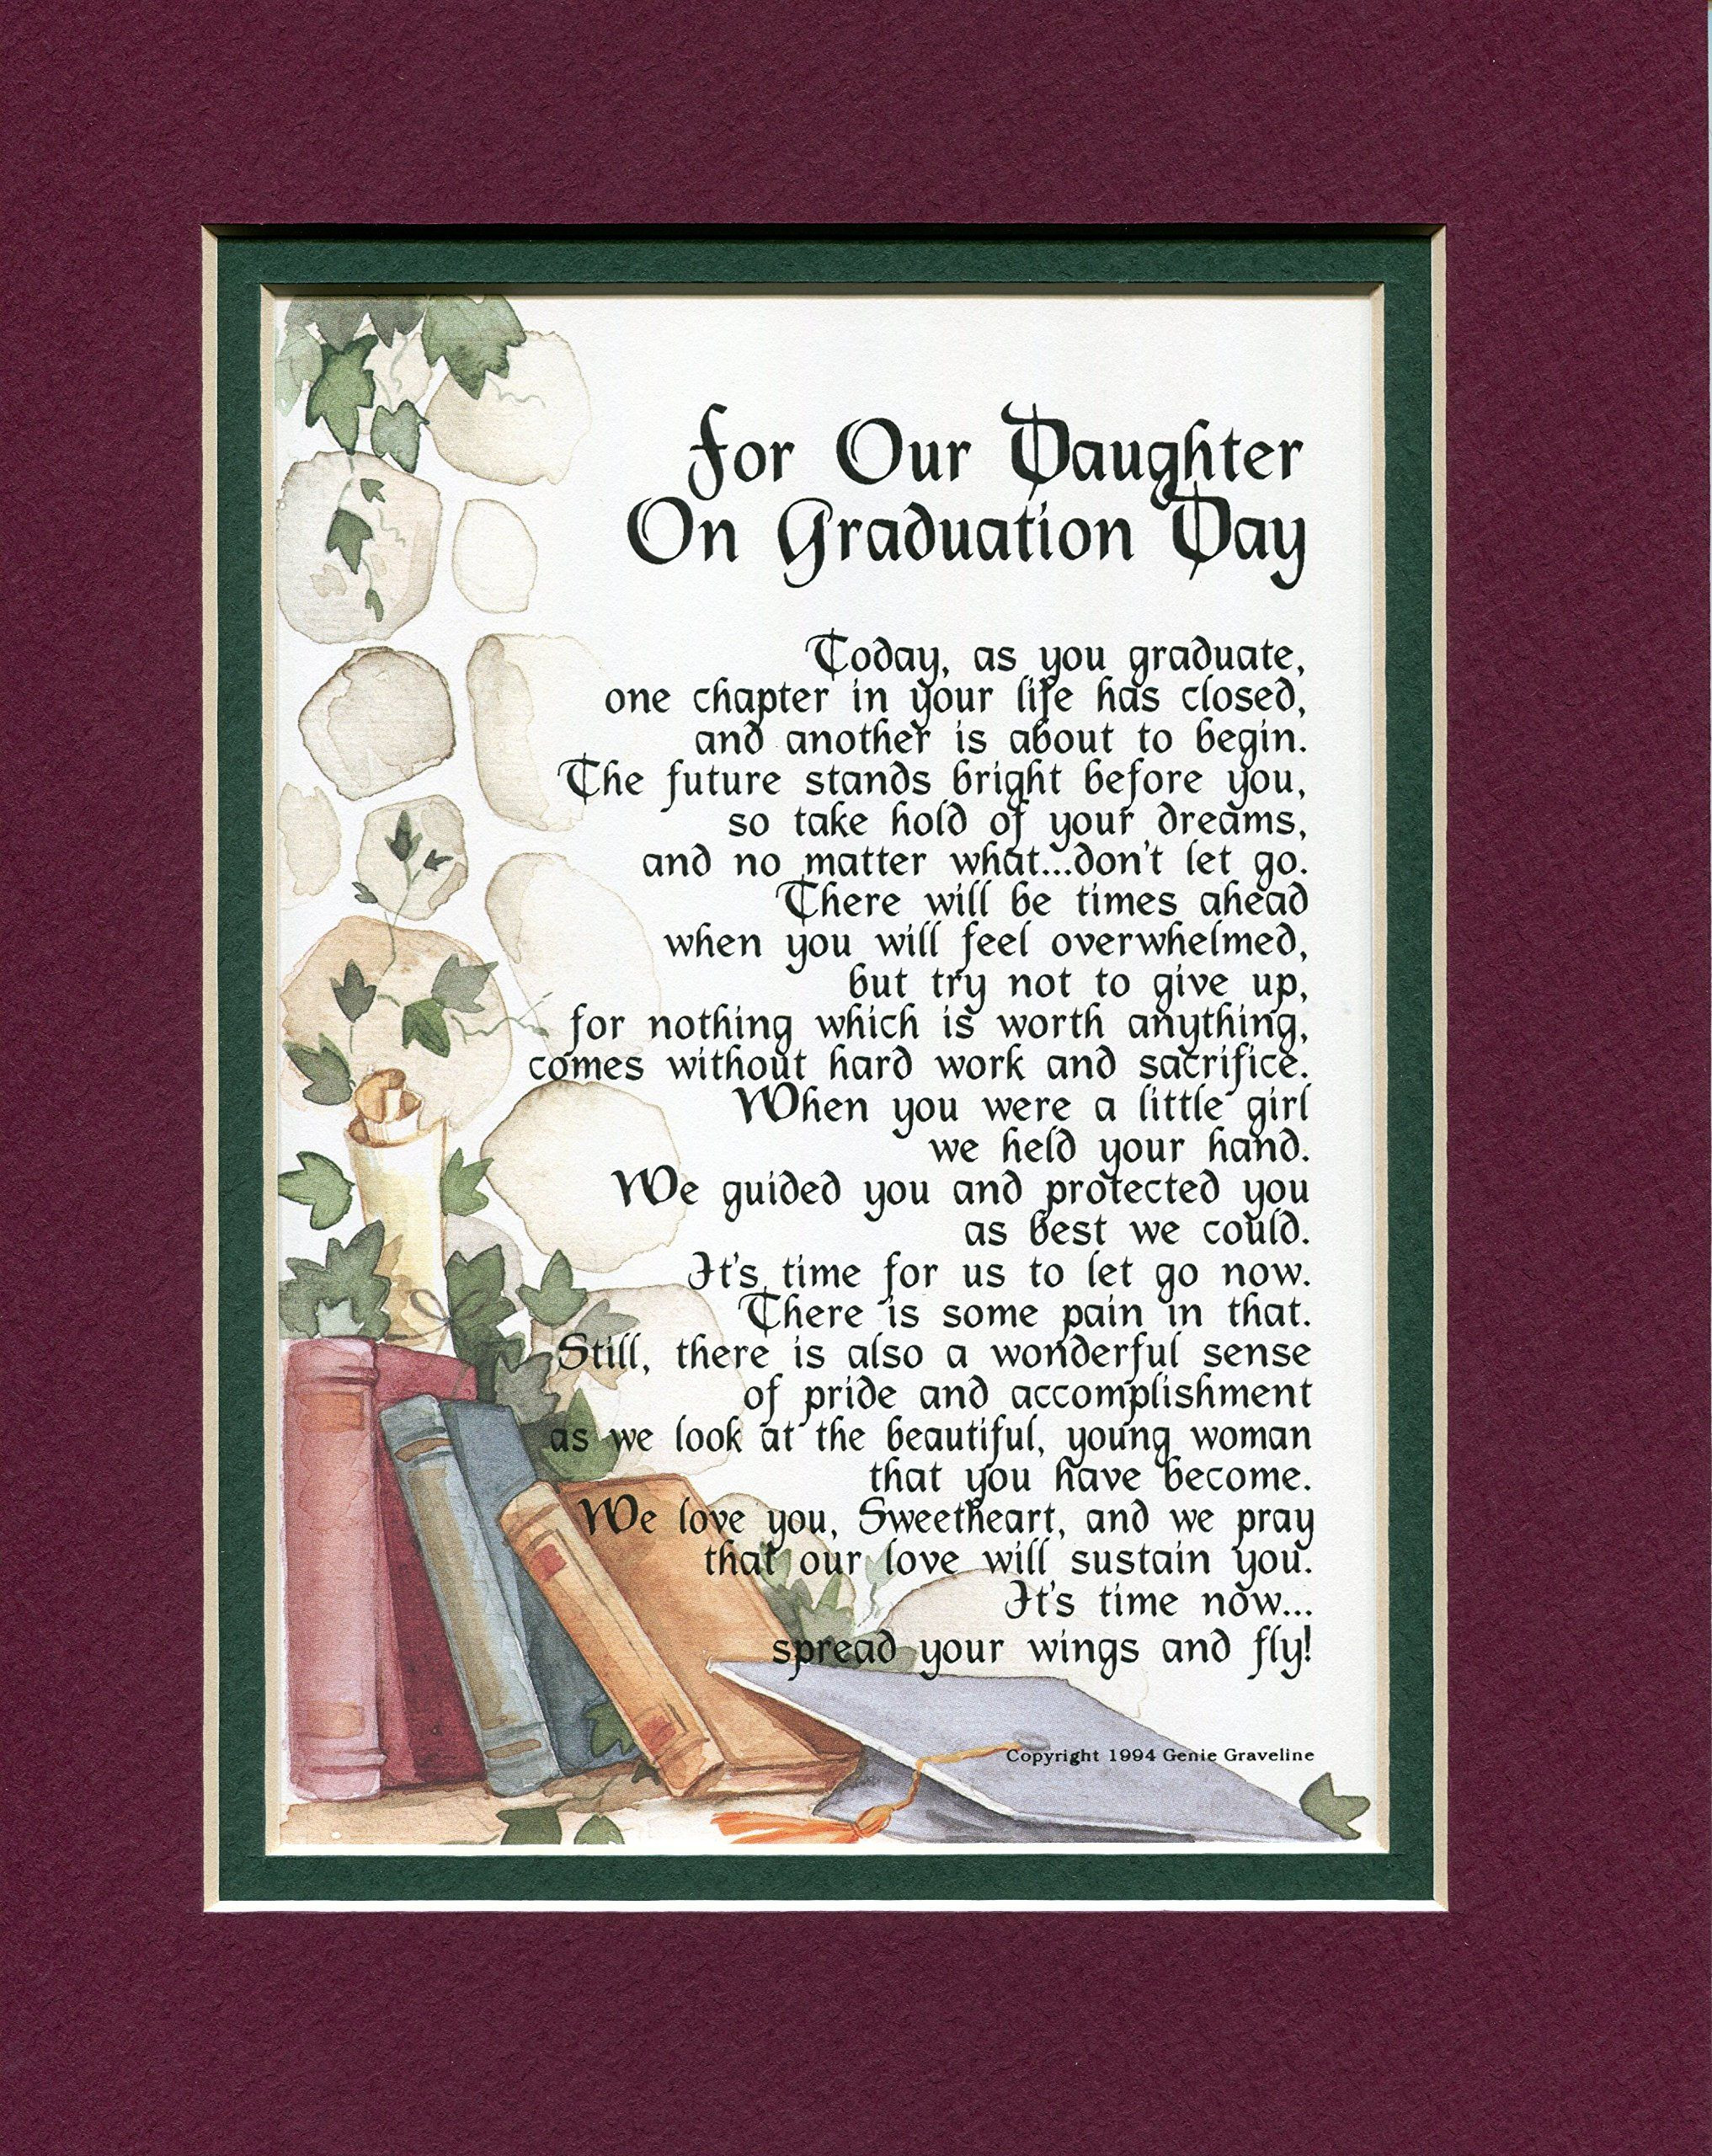 Graduation Quotes For Daughters
 A Graduation Gift For A Daughter Touching 8x10 Poem